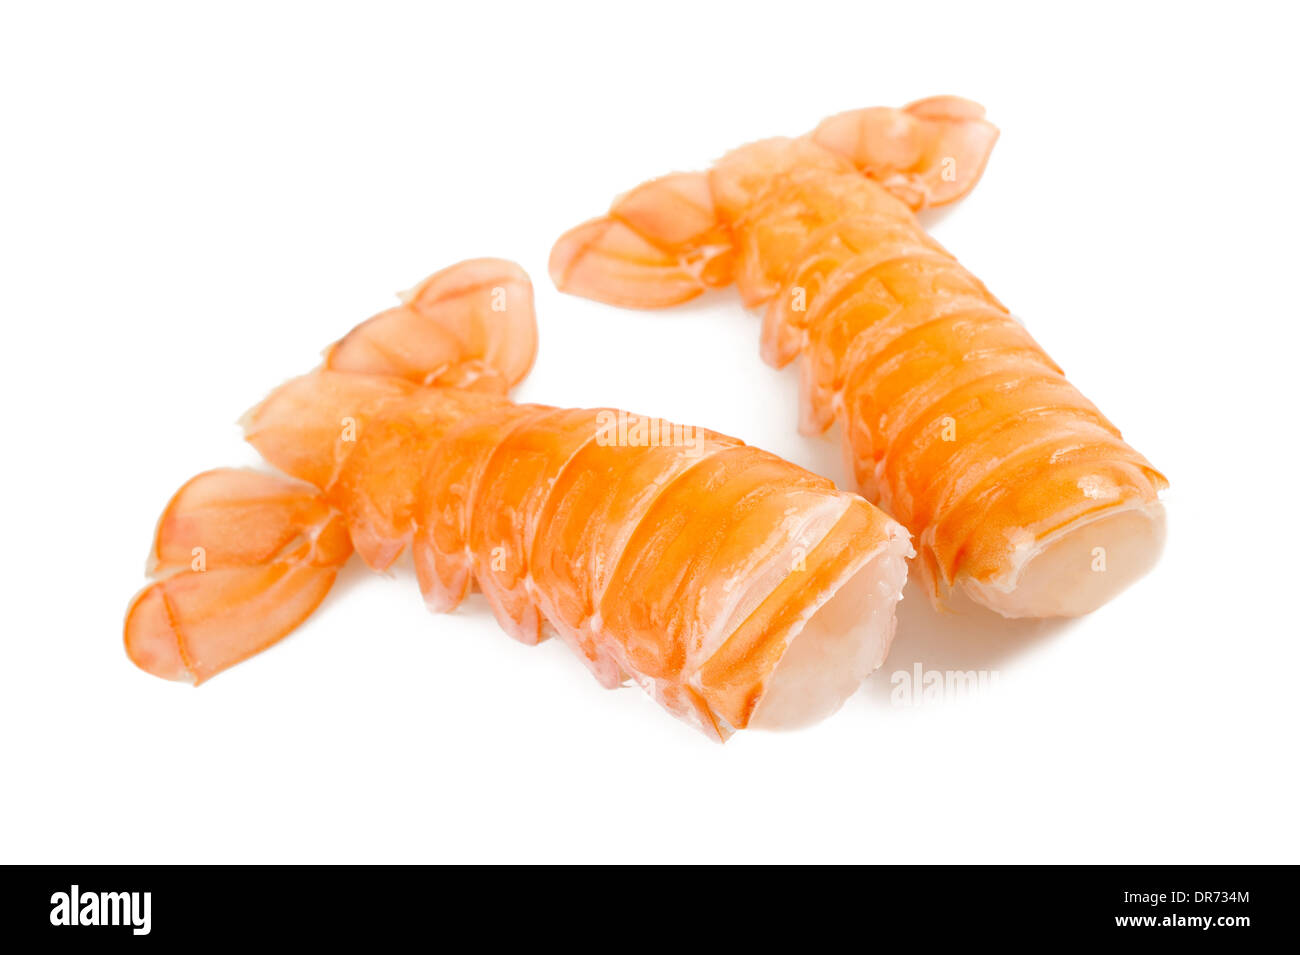 Two prawn tails isolated on white background Stock Photo